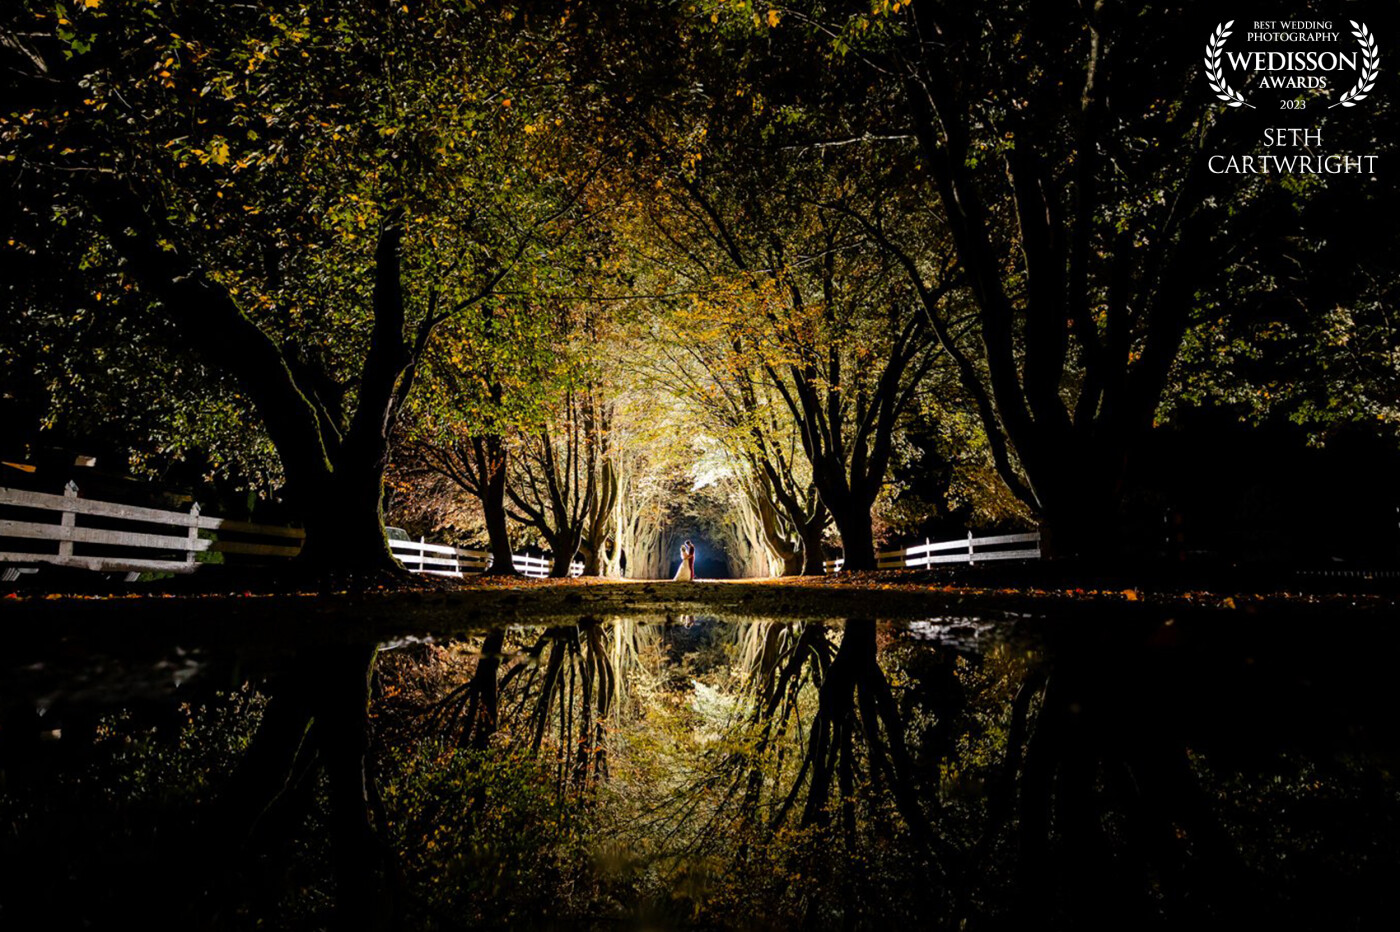 We didn't get a lot of time to take photos with the couple during the day because of the rain, but later at night it stopped raining, and I really wanted to capture both the trees and the reflection from the puddles now available. And this was the result. I set it up and this was the first photo I took!